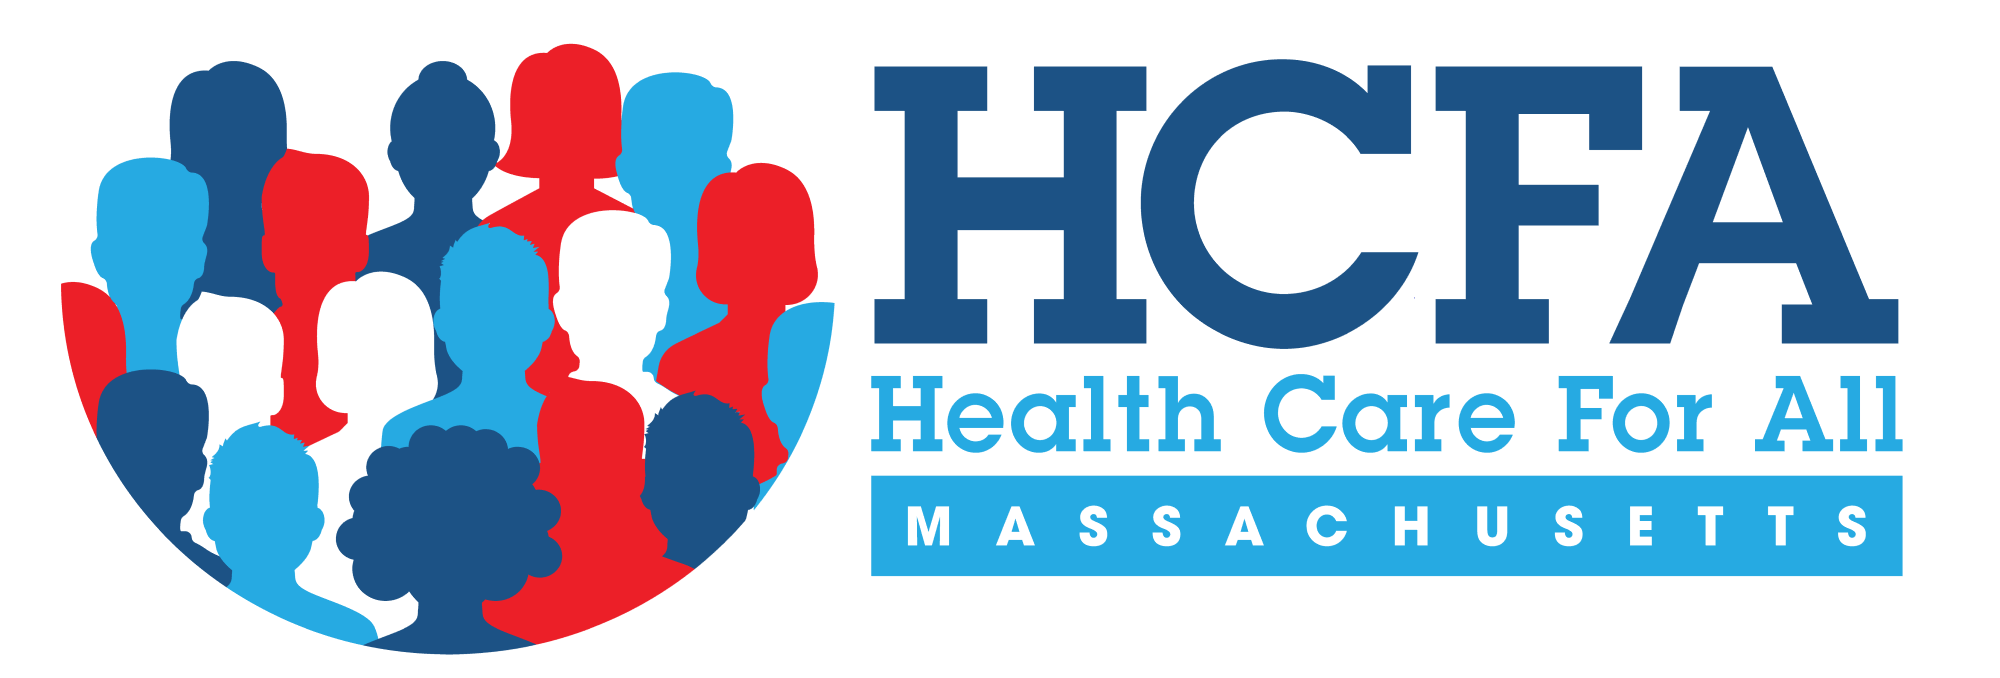 ConnectorCare expansion casualty of chaotic session | Haverhill Gazette | September 1, 2022